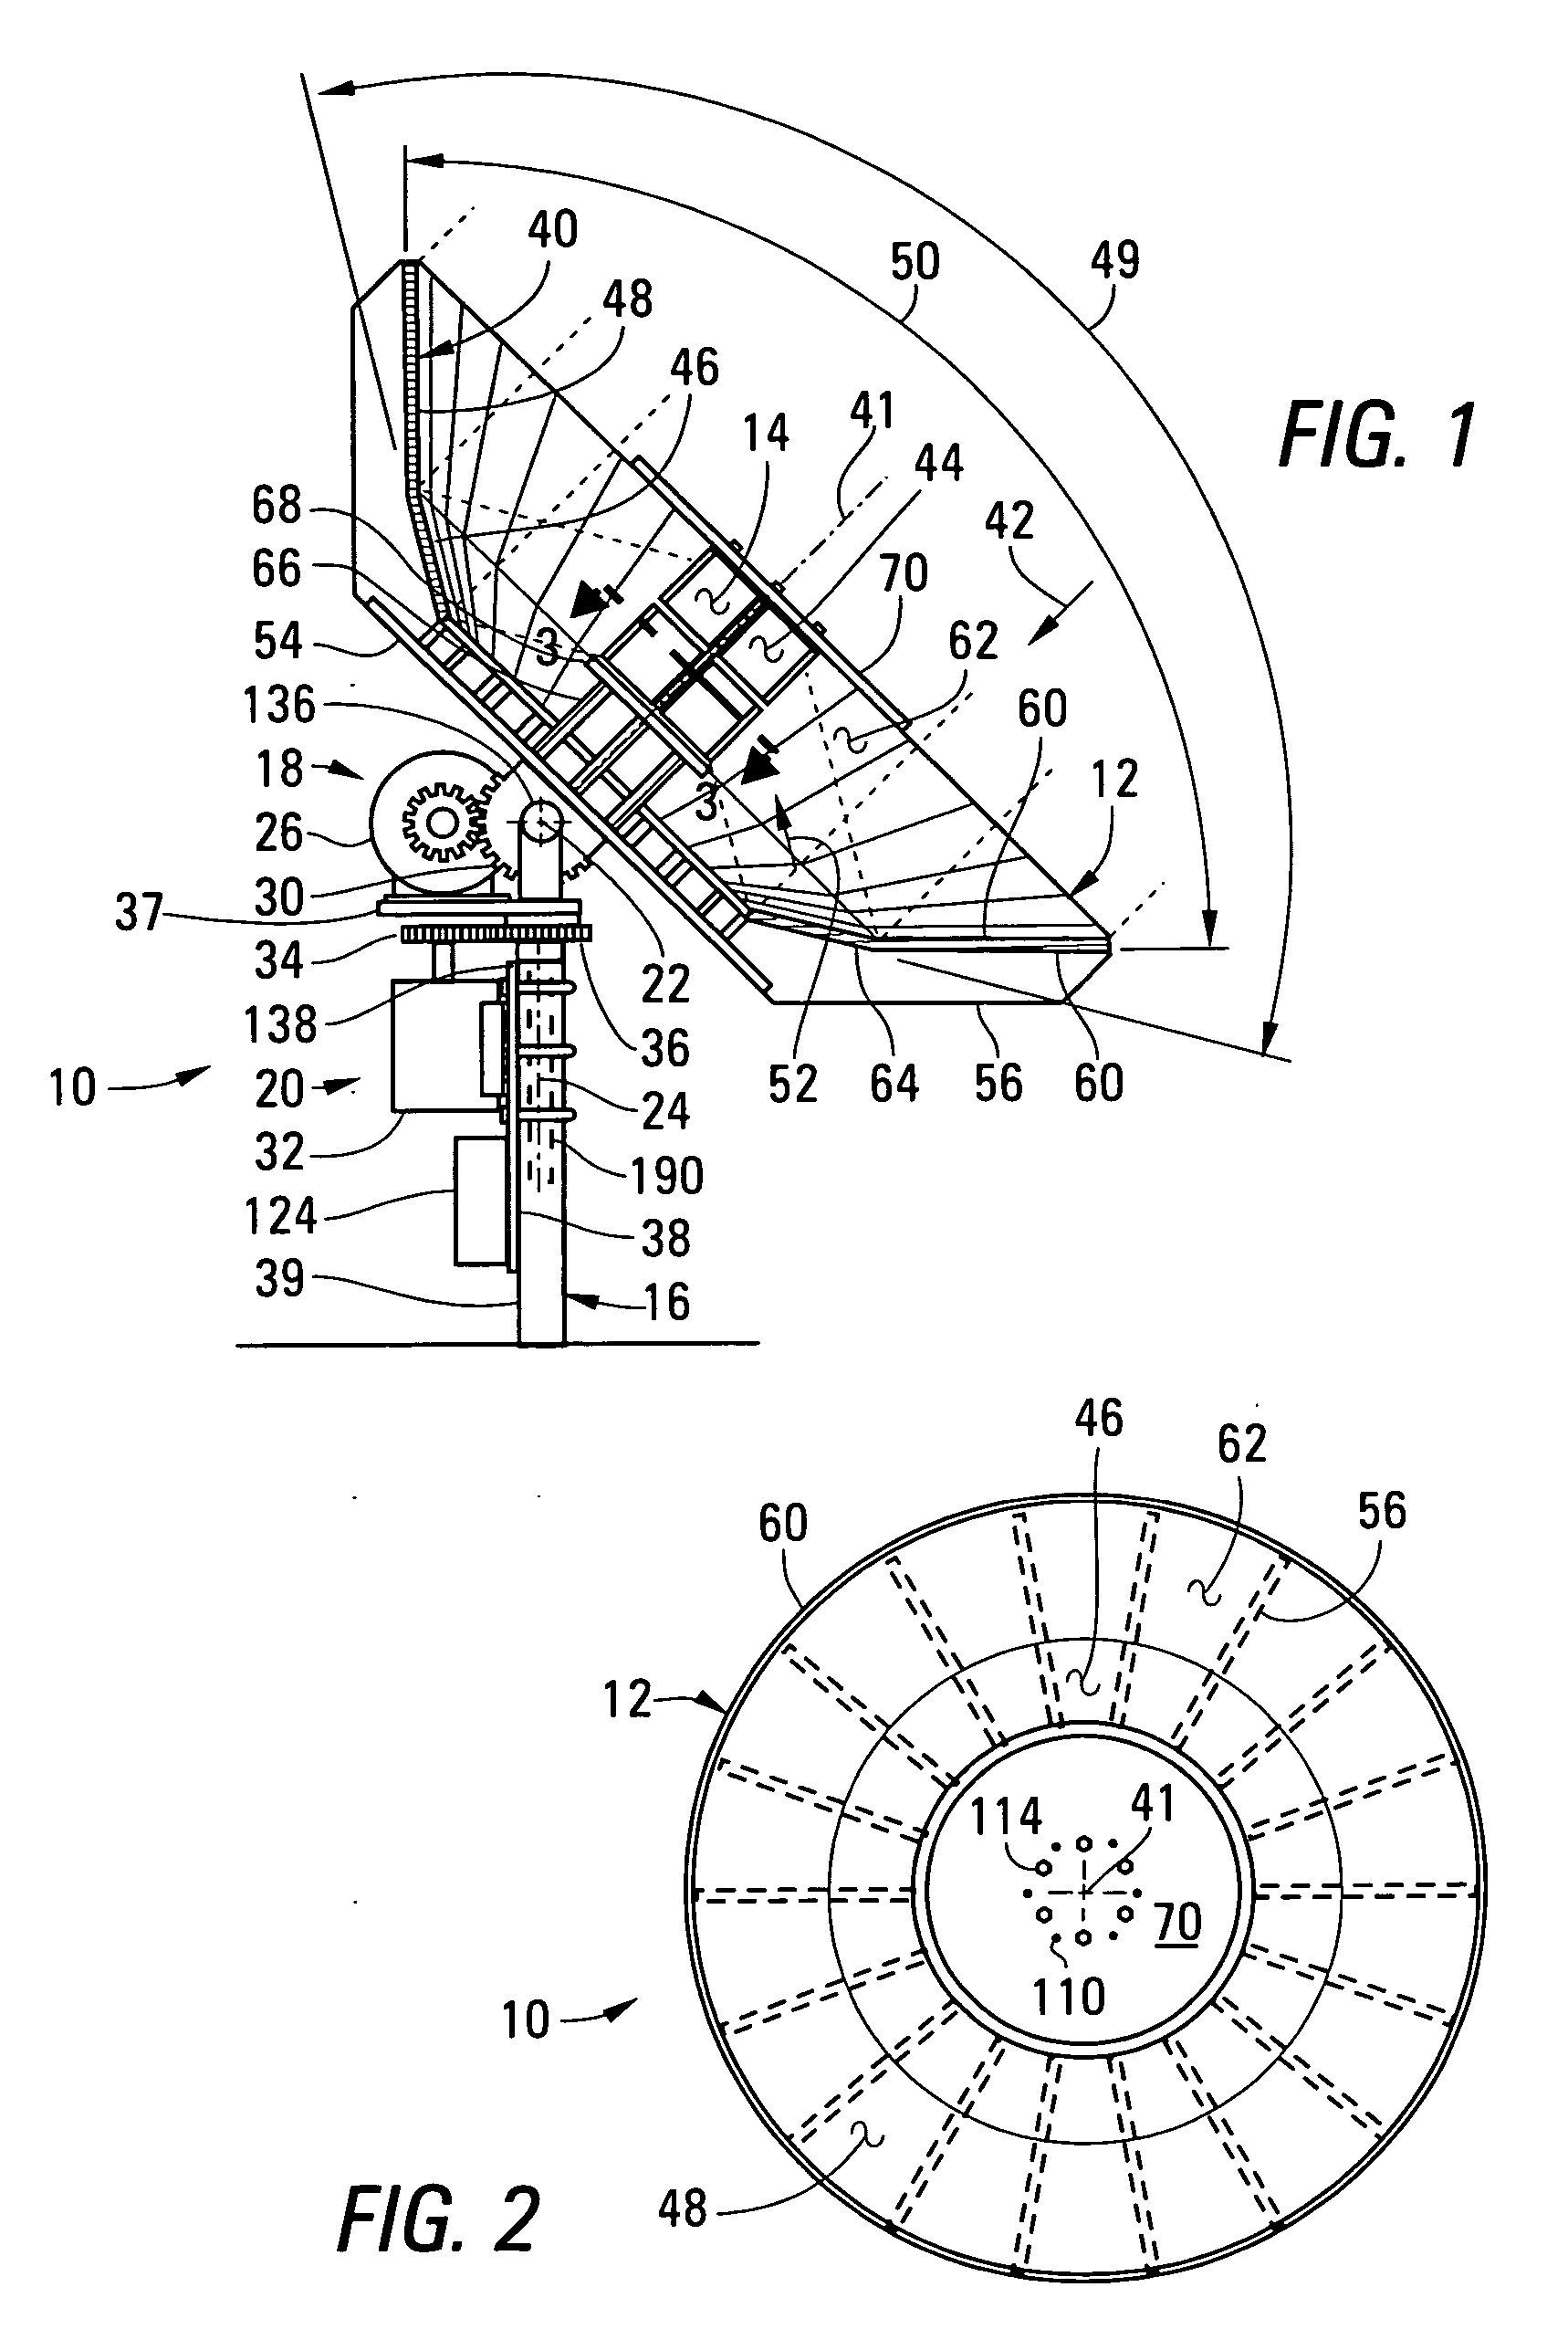 Apparatus for generating electrical power from solar radiation concentrated by a concave reflector